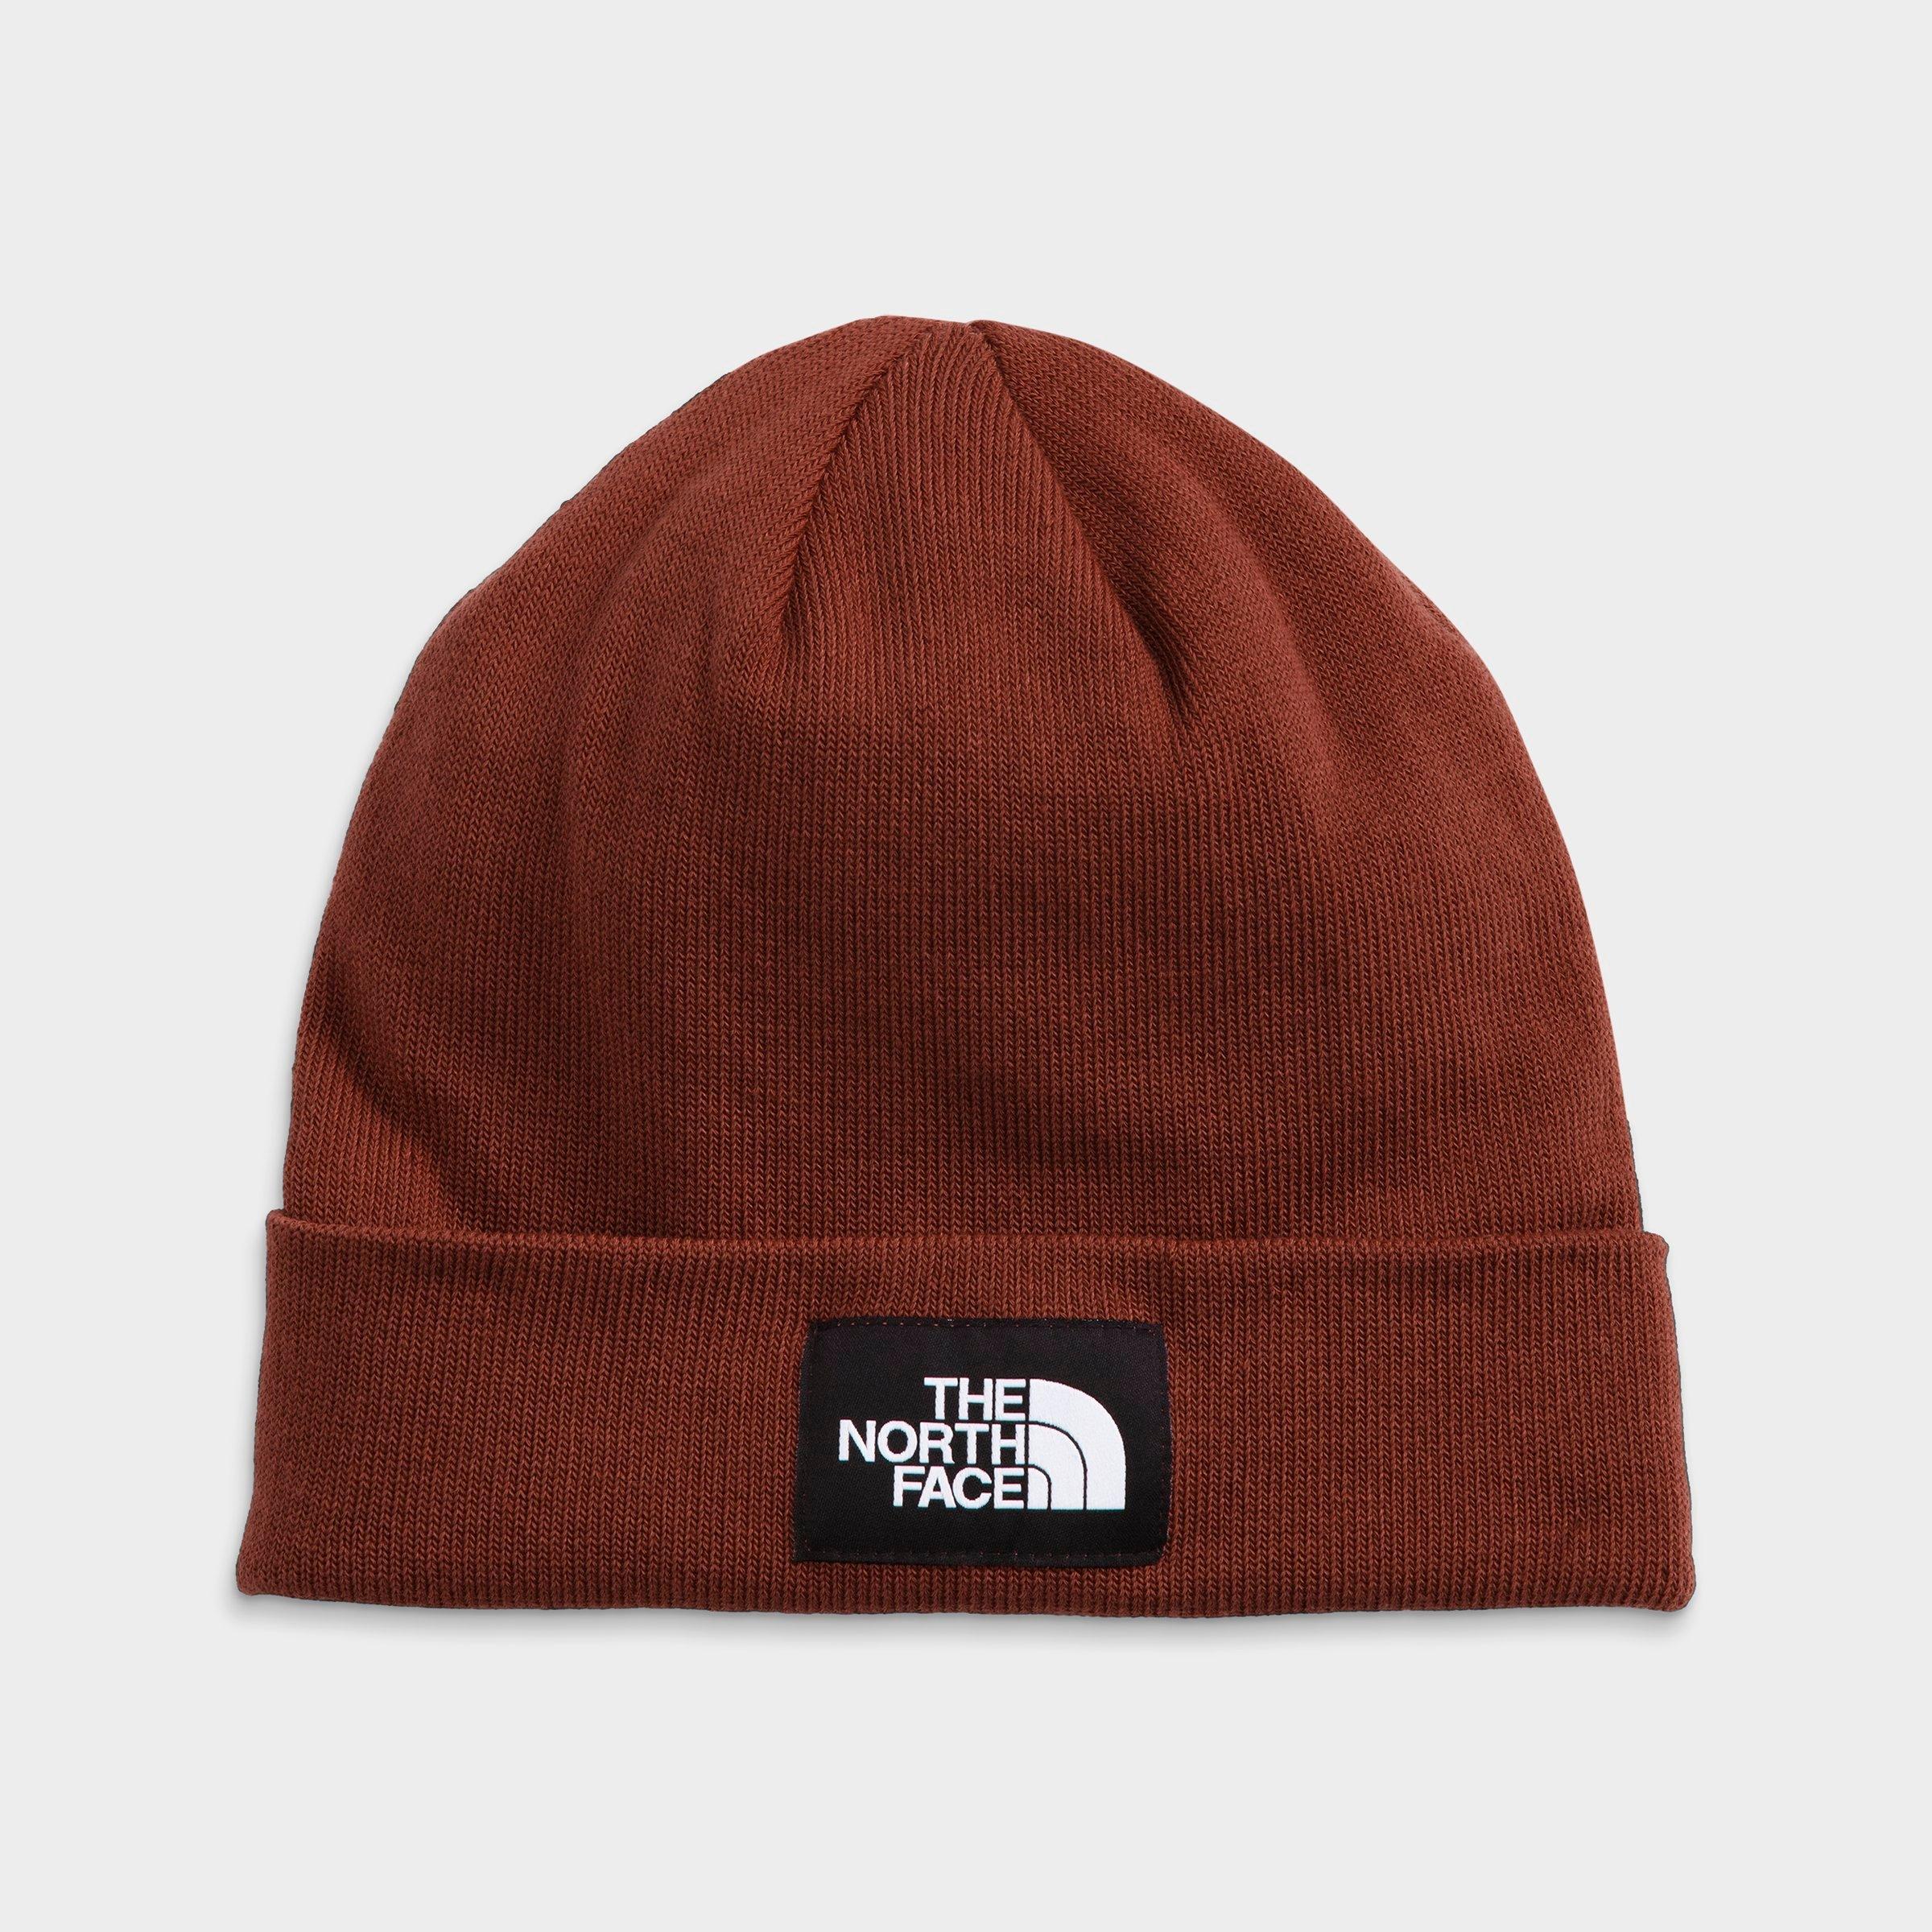 The North Face Inc Dock Worker Recycled Beanie Hat In Dark Oak